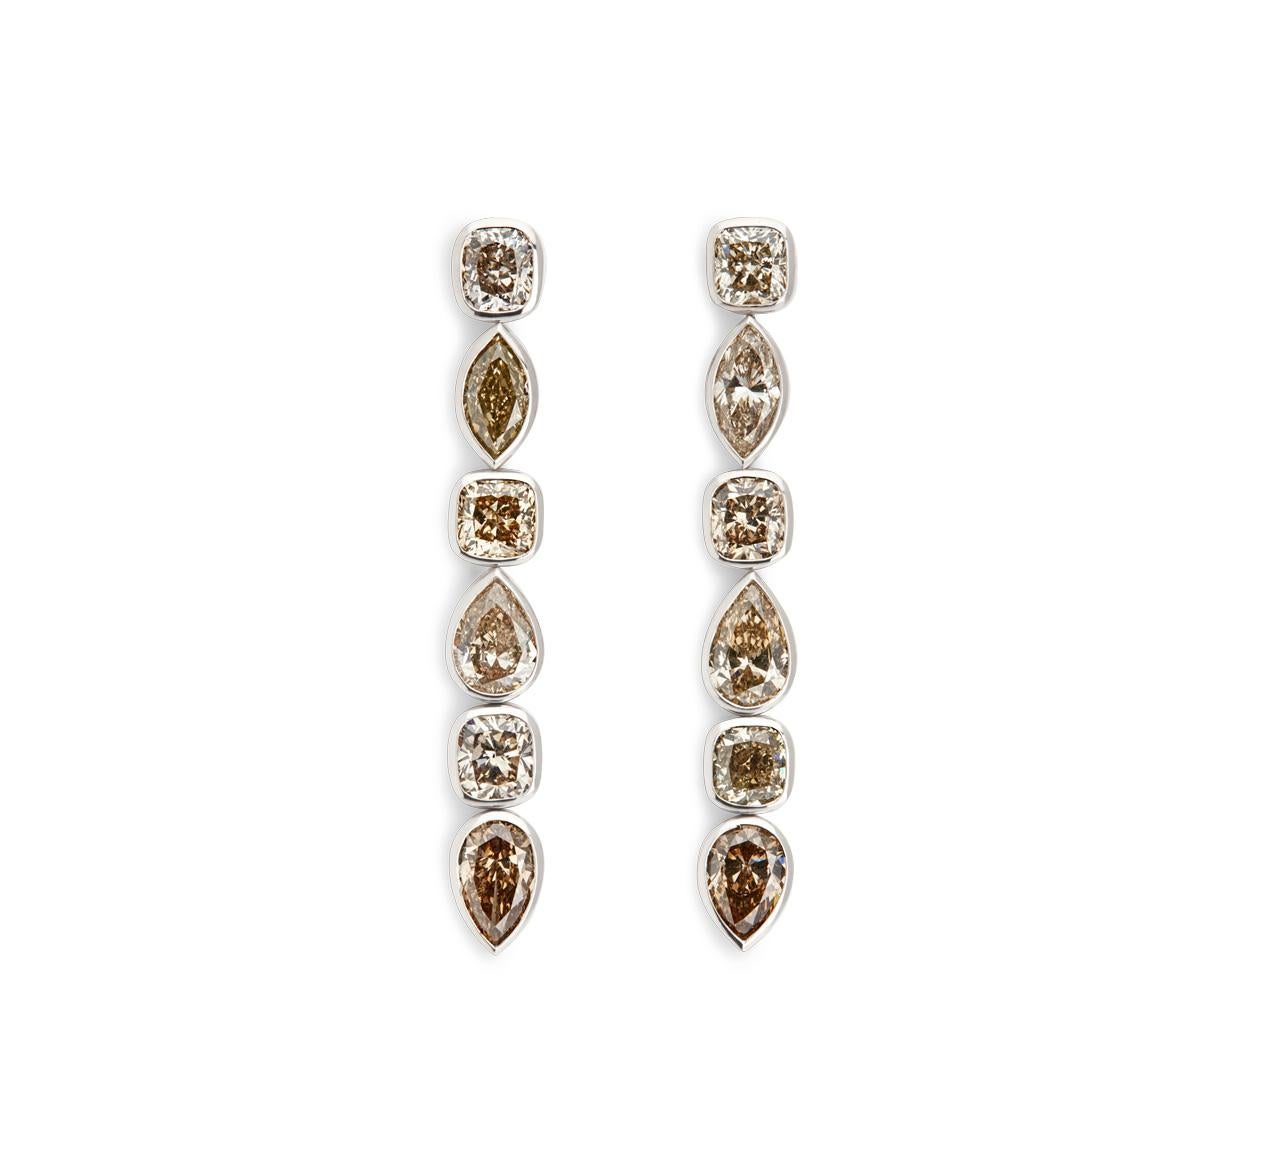 These glamorous red carpet earrings are set in 18 carat white gold with various 12,65 ct cognac diamonds.